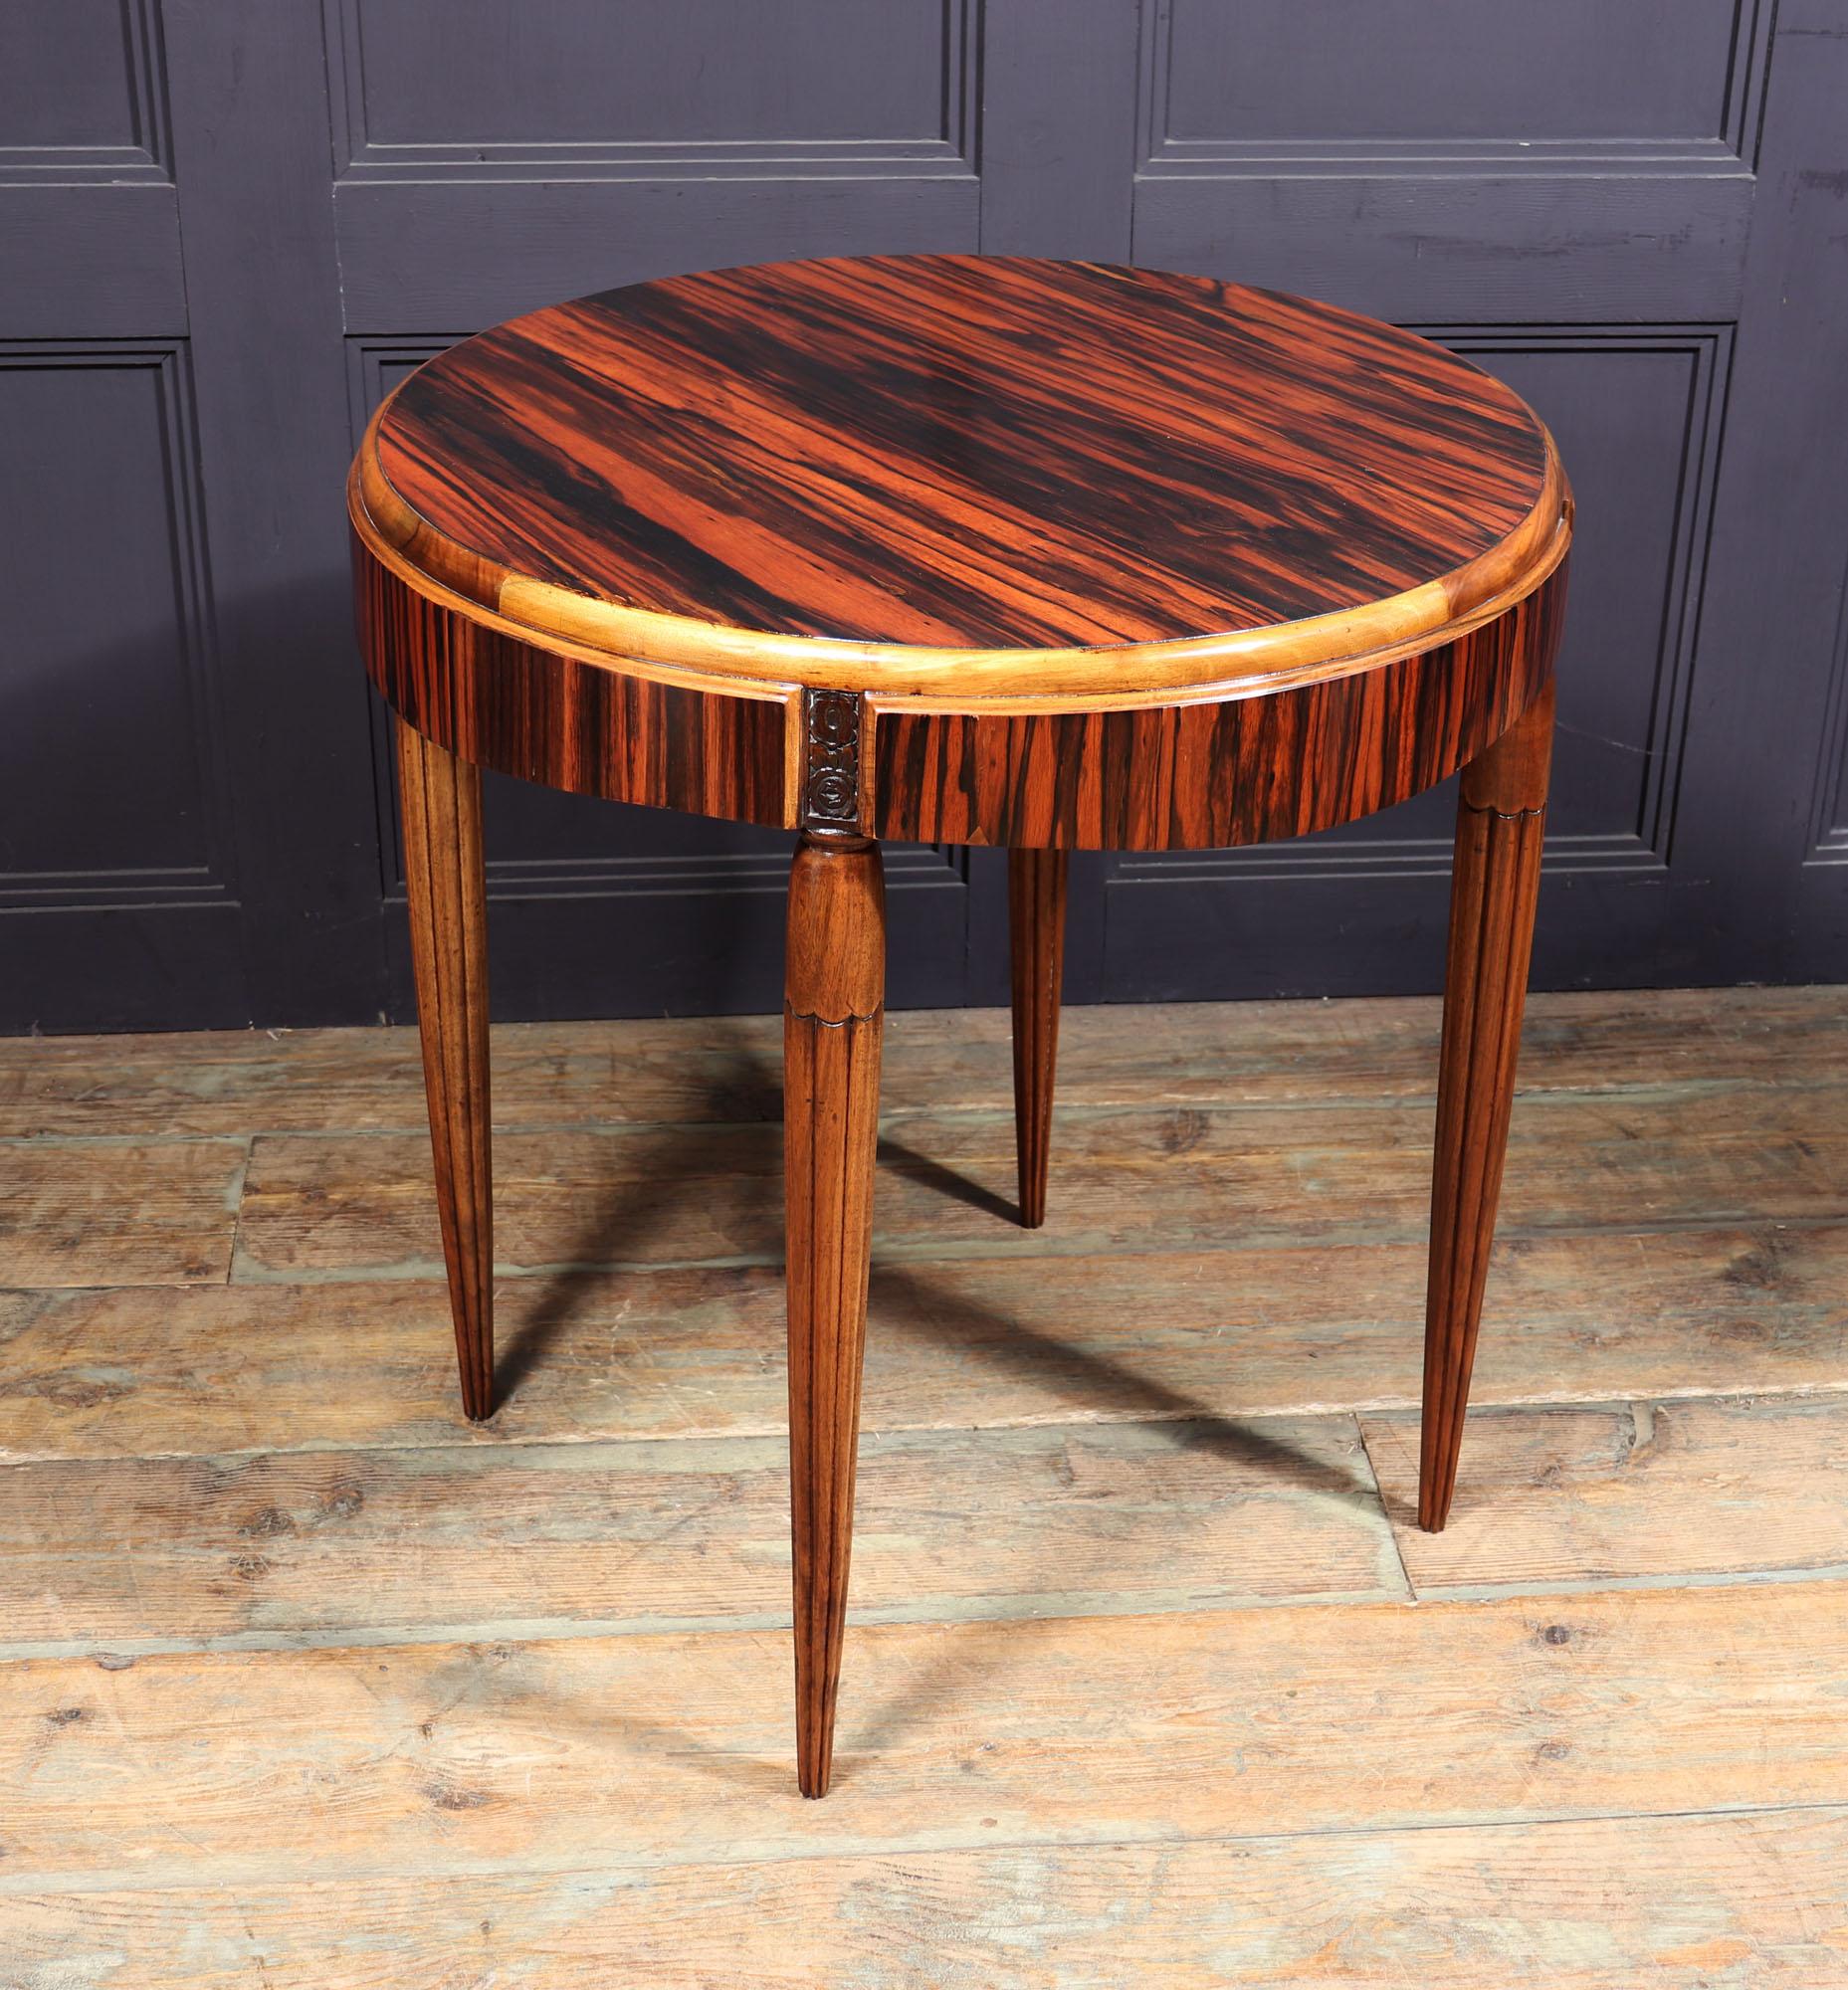 Early 20th Century French Art Deco Table in Macassar ebony and Walnut For Sale